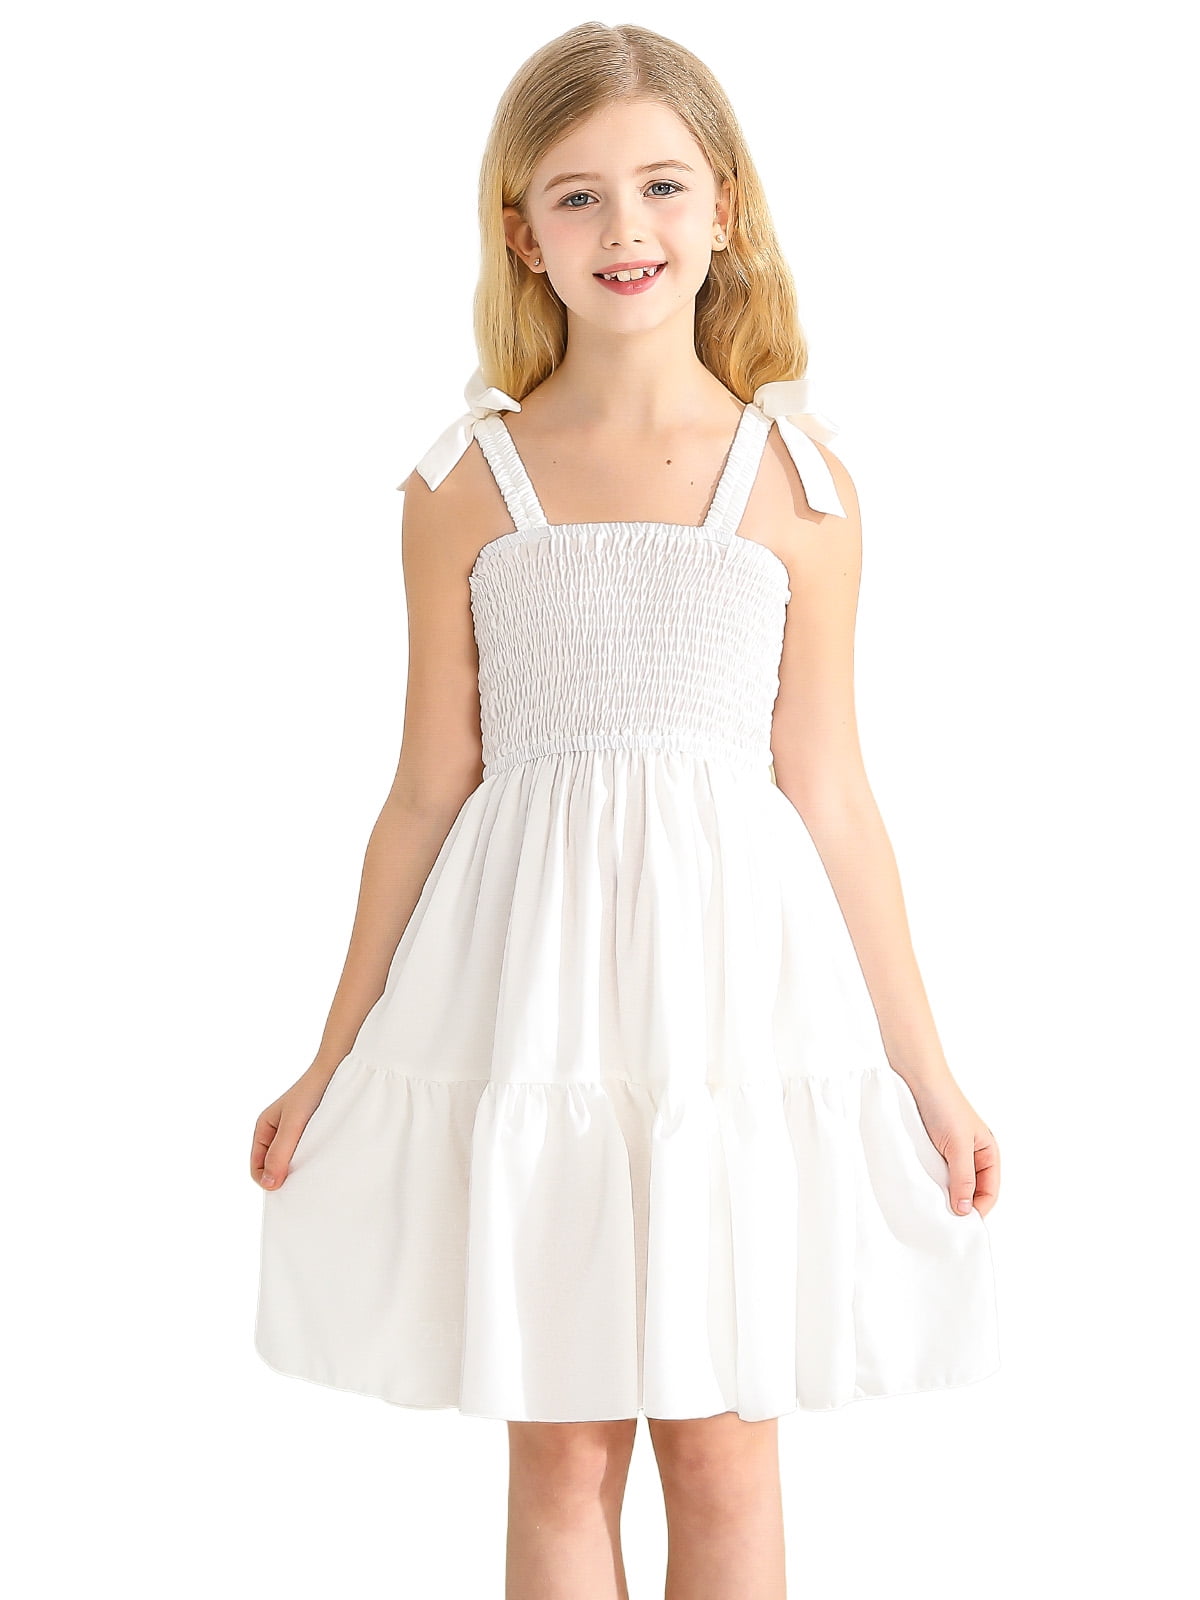 White Sport Suit Girls, Girls Clothes Age 10, Summer Clothes Girls